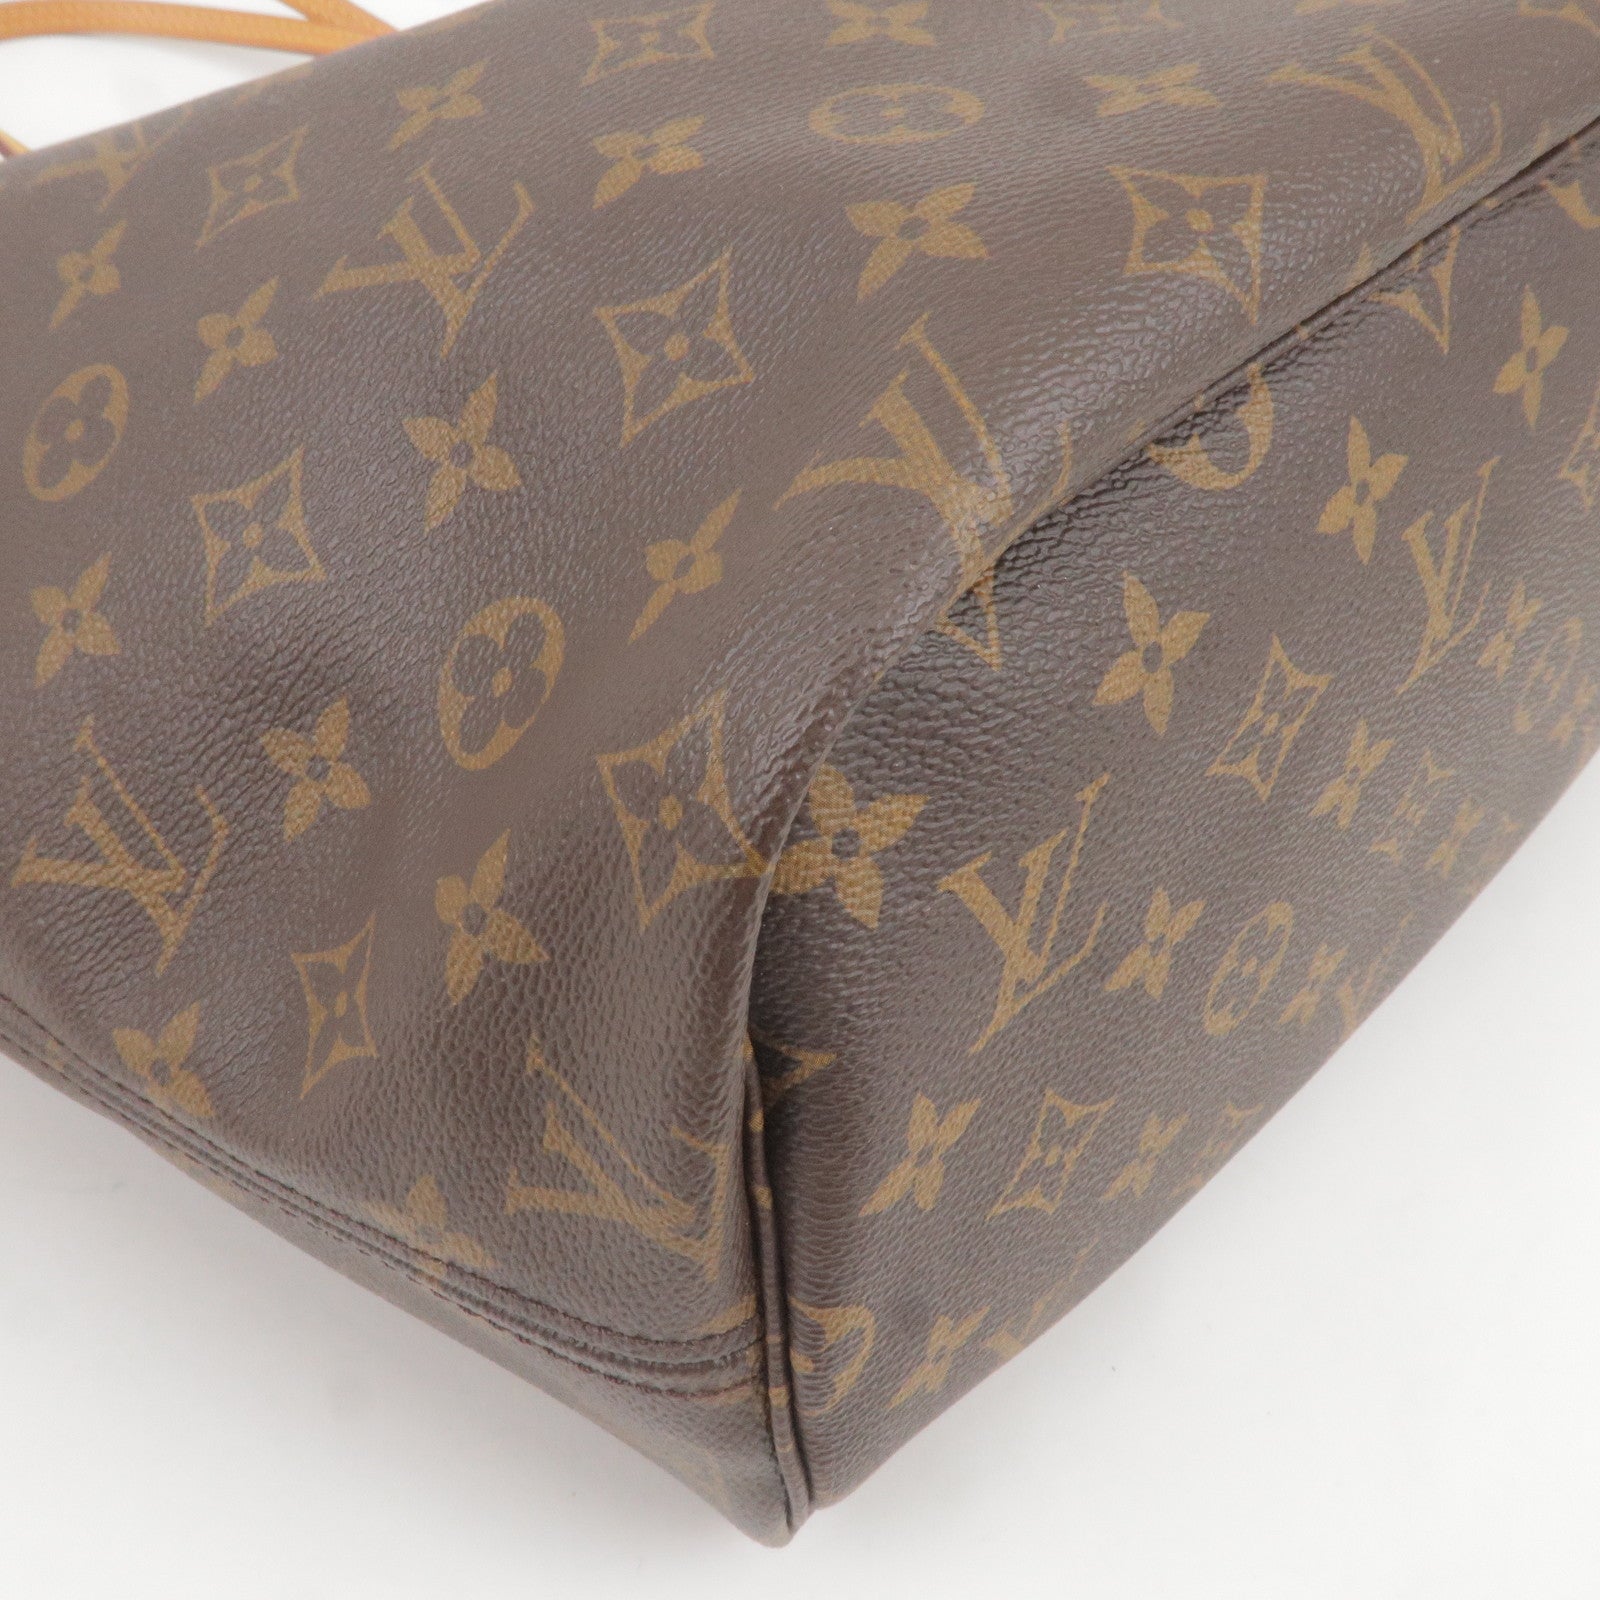 Louis Vuitton 2006 pre-owned Melville belt bag price in Doha Qatar